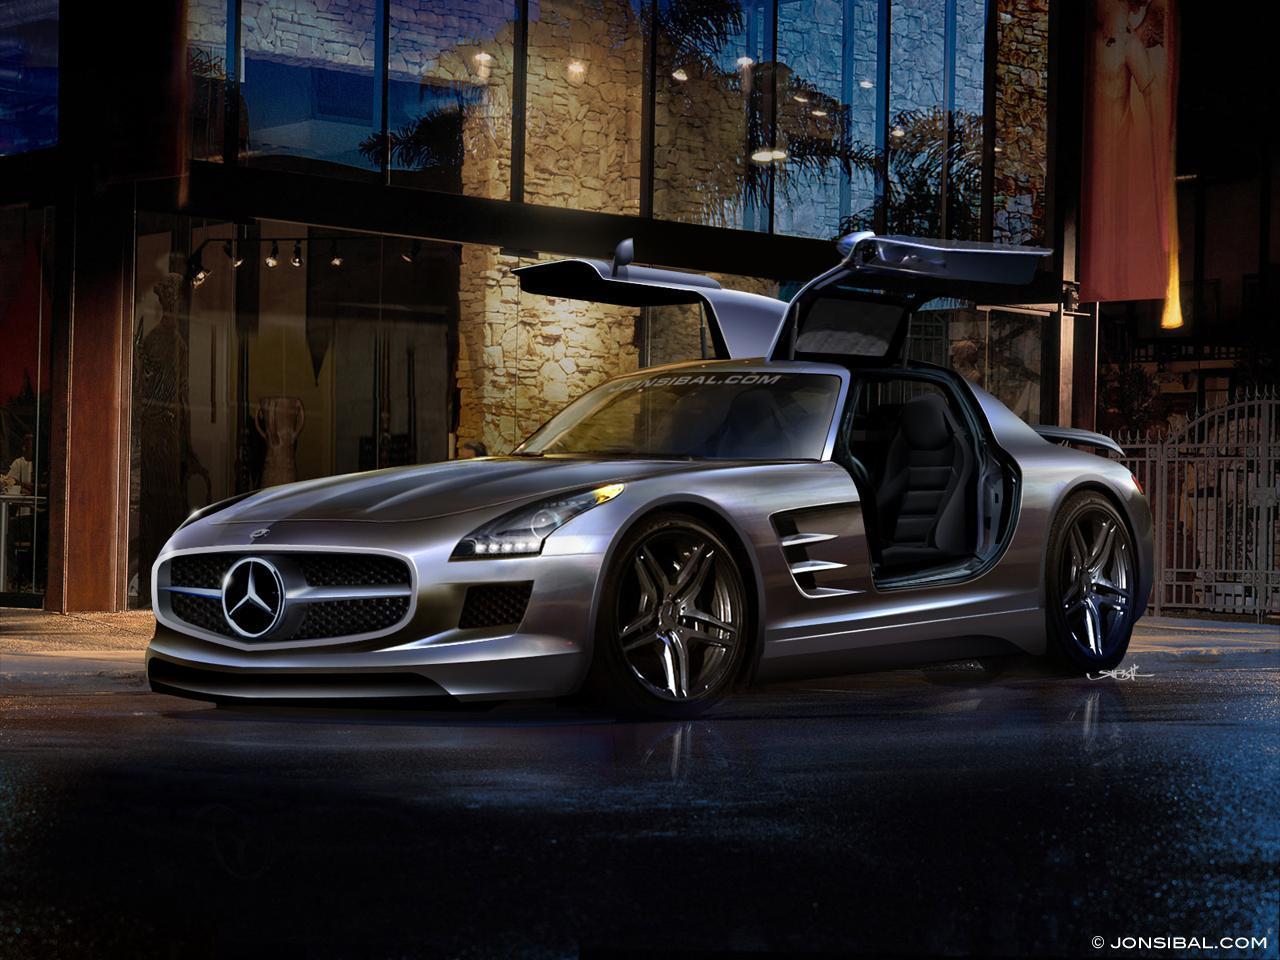 Mercedes Benz SLS AMG Wallpapers HD Full HD Pictures